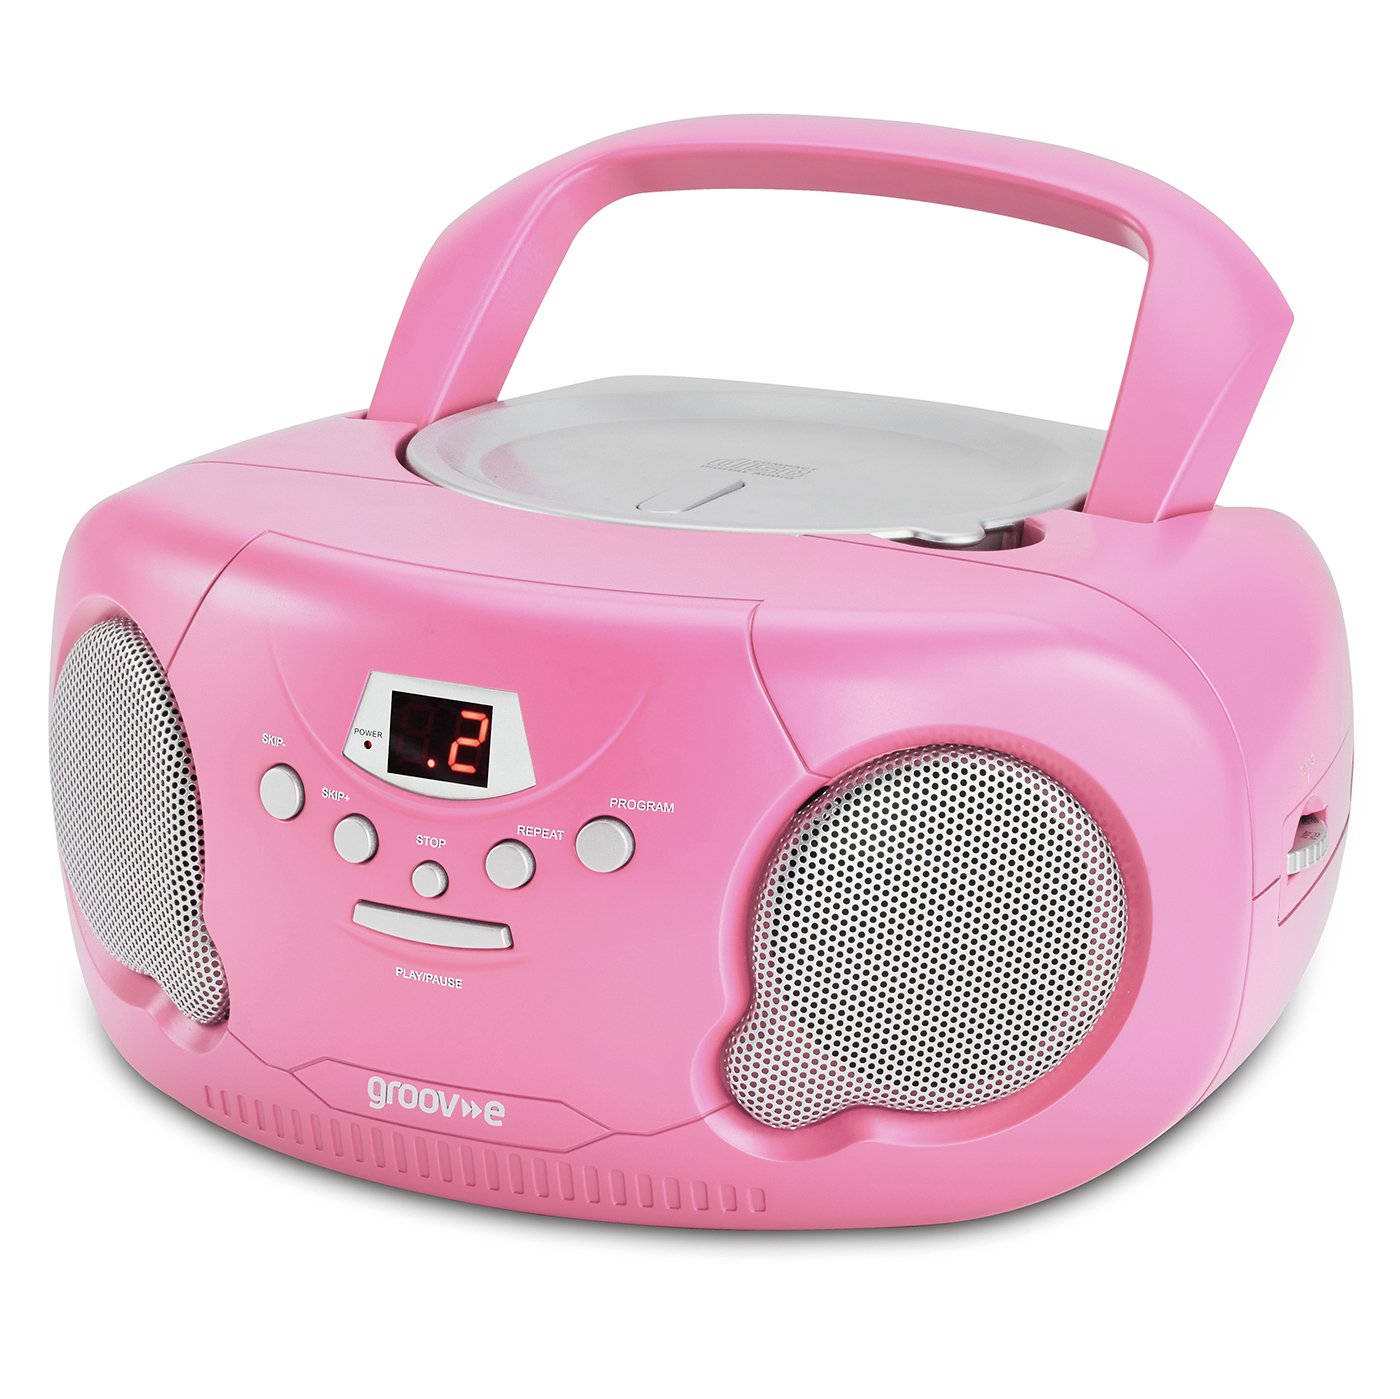 Groov-e Boombox CD Player with Radio - Pink